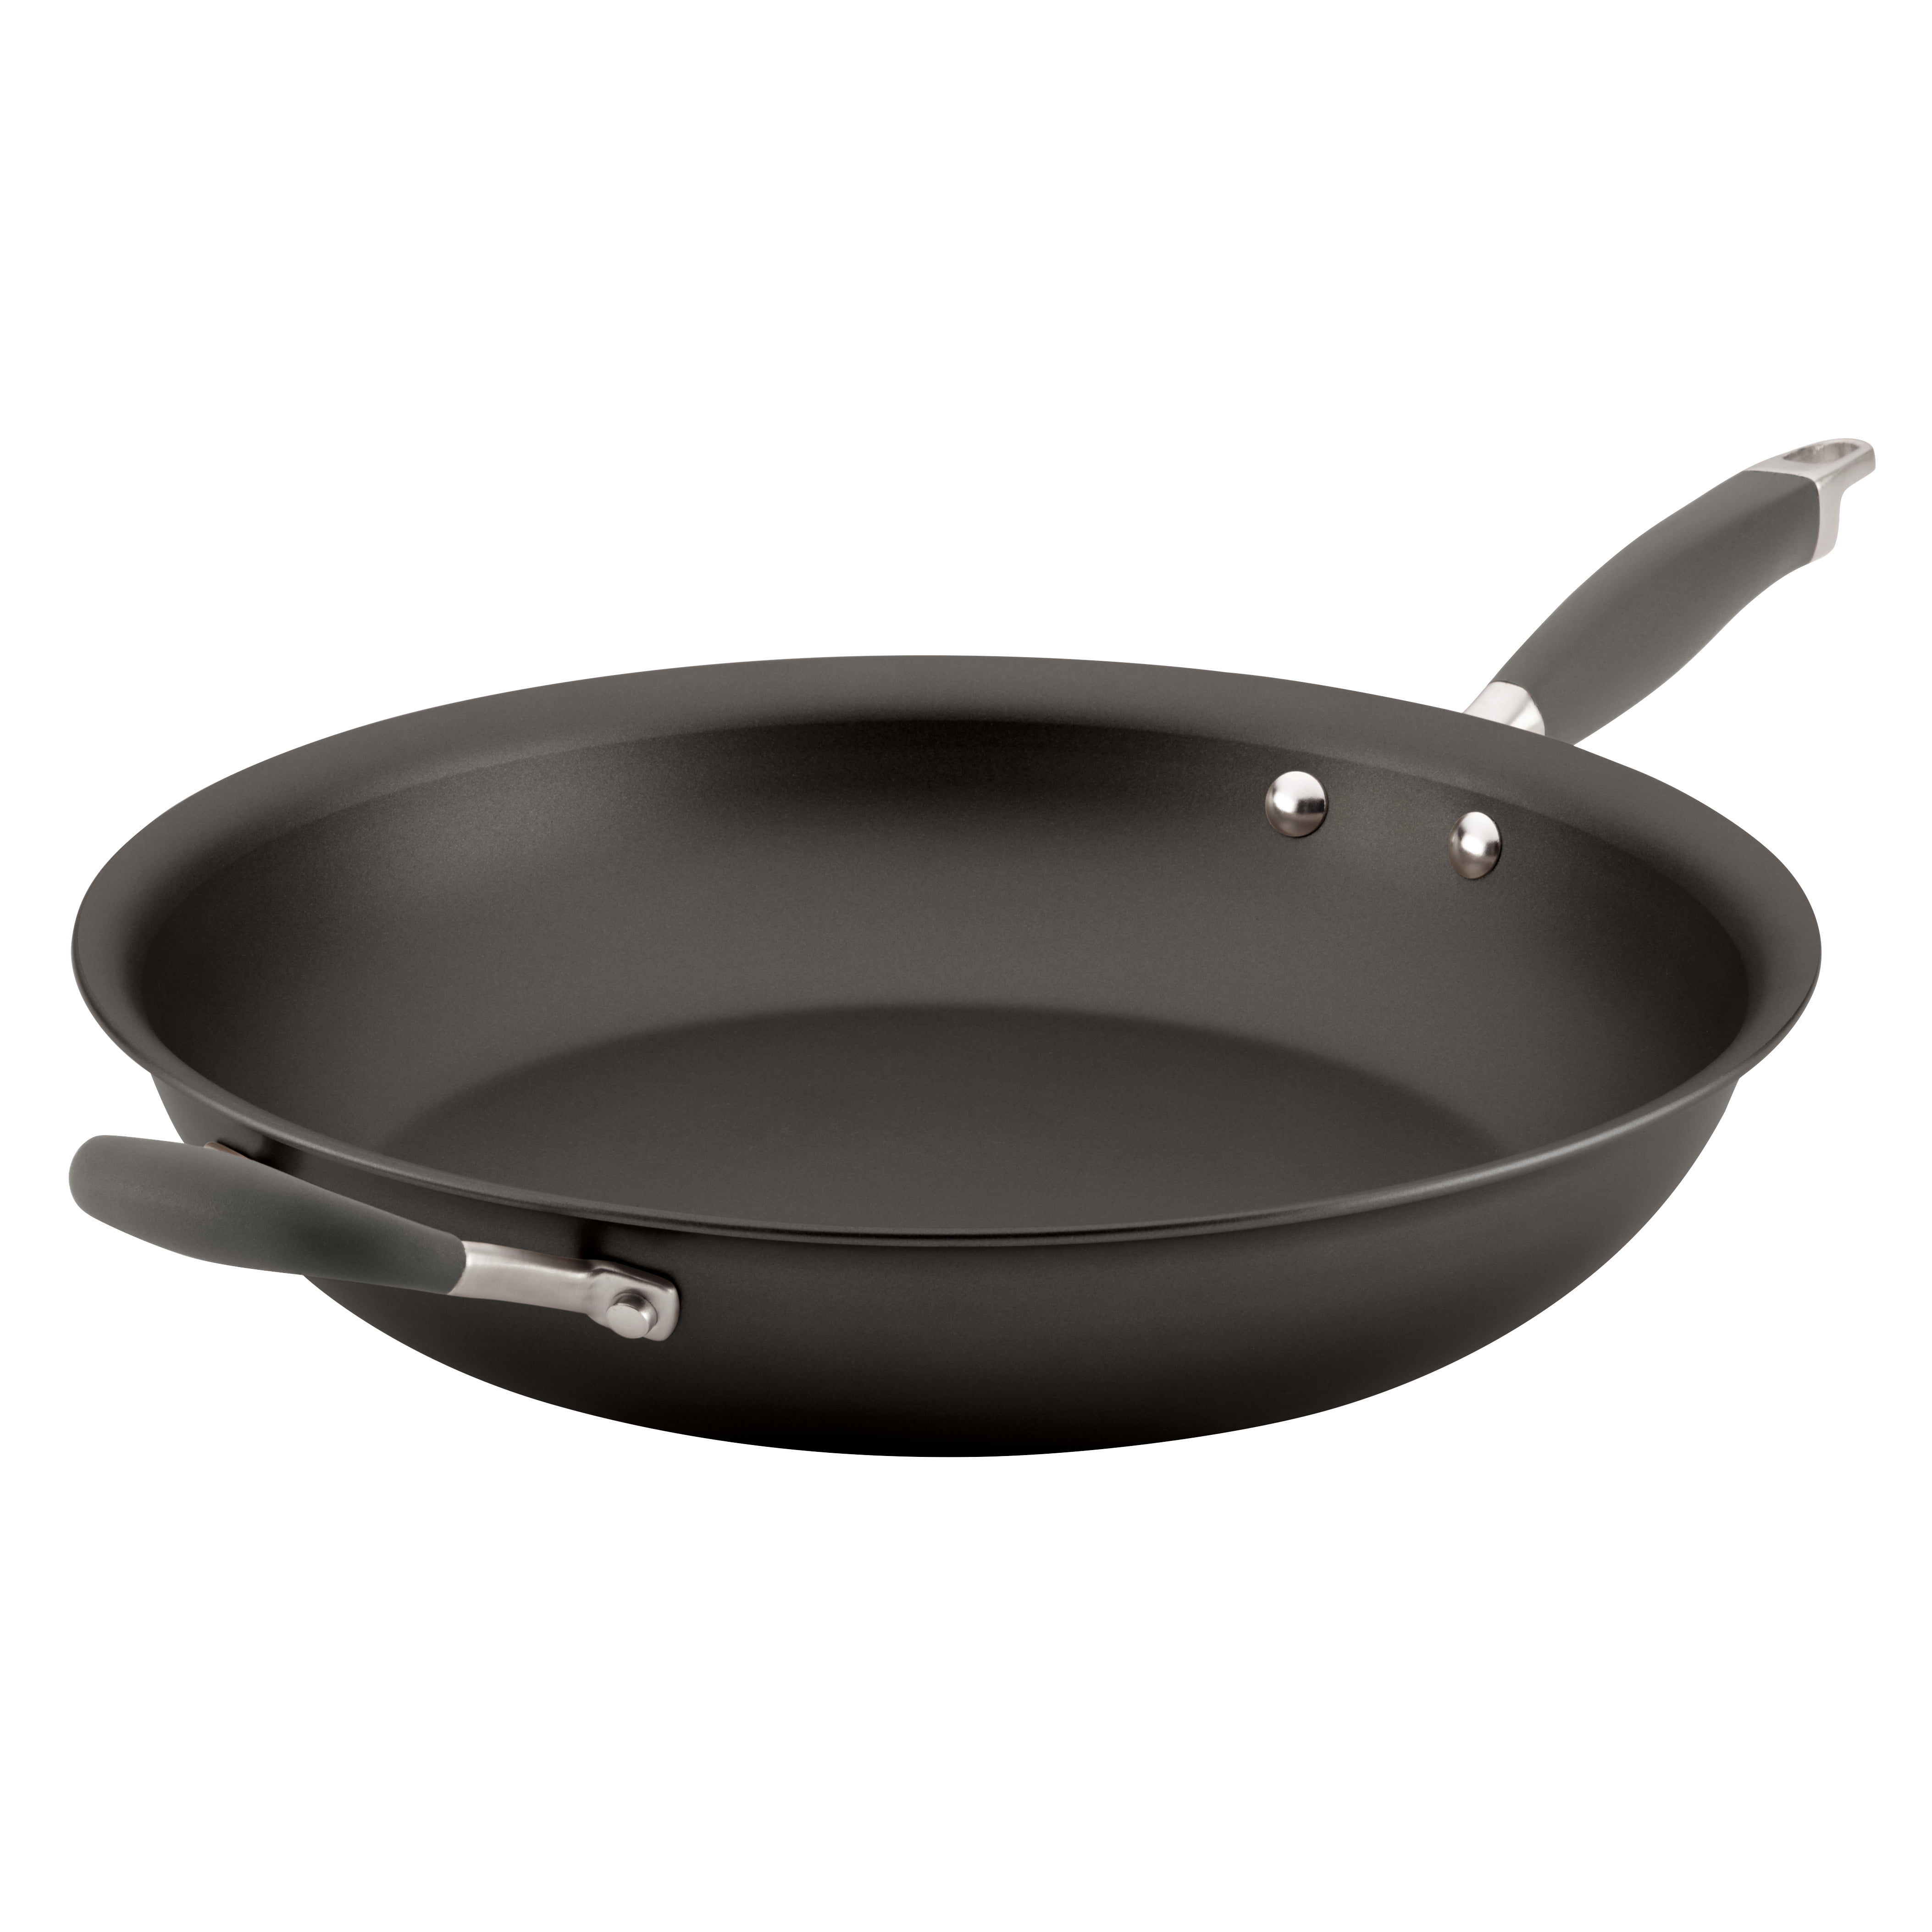 Light Brown Anolon Advanced Nonstick Fry Pan Hard Anodized Skillet Set 10 Inch and 12 Inch 